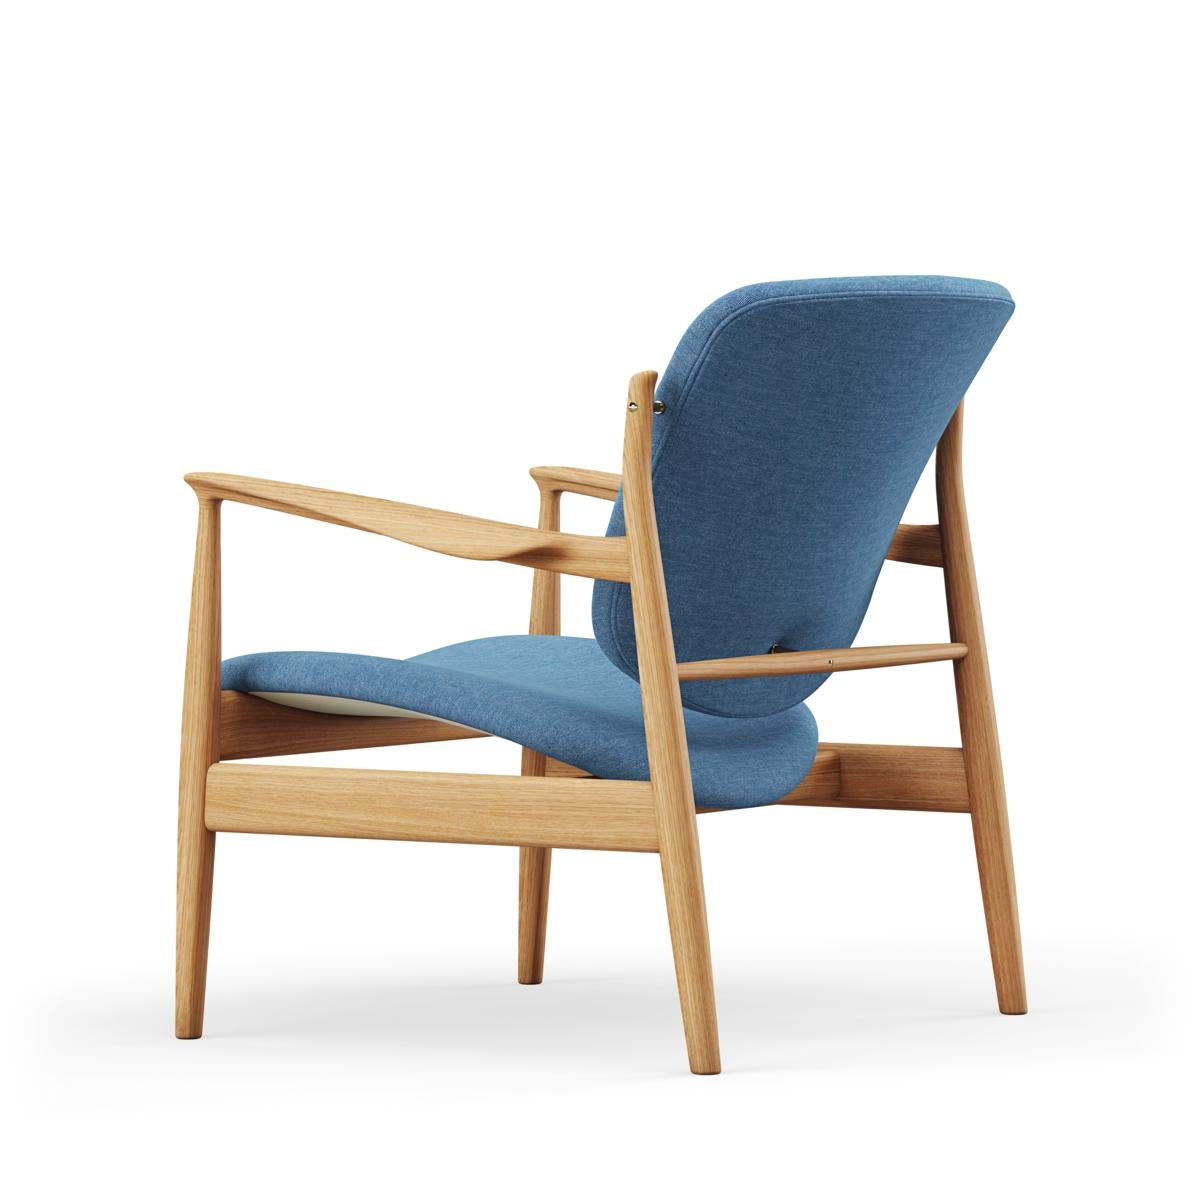 Armchair designed by Finn Juhl in 1956, relaunched in 20016.
Manufactured by House of Finn Juhl in Denmark.

Finn Juhl rode a wave of international success during the 1950s - in part thanks to his partnership with the Danish furniture manufacturer